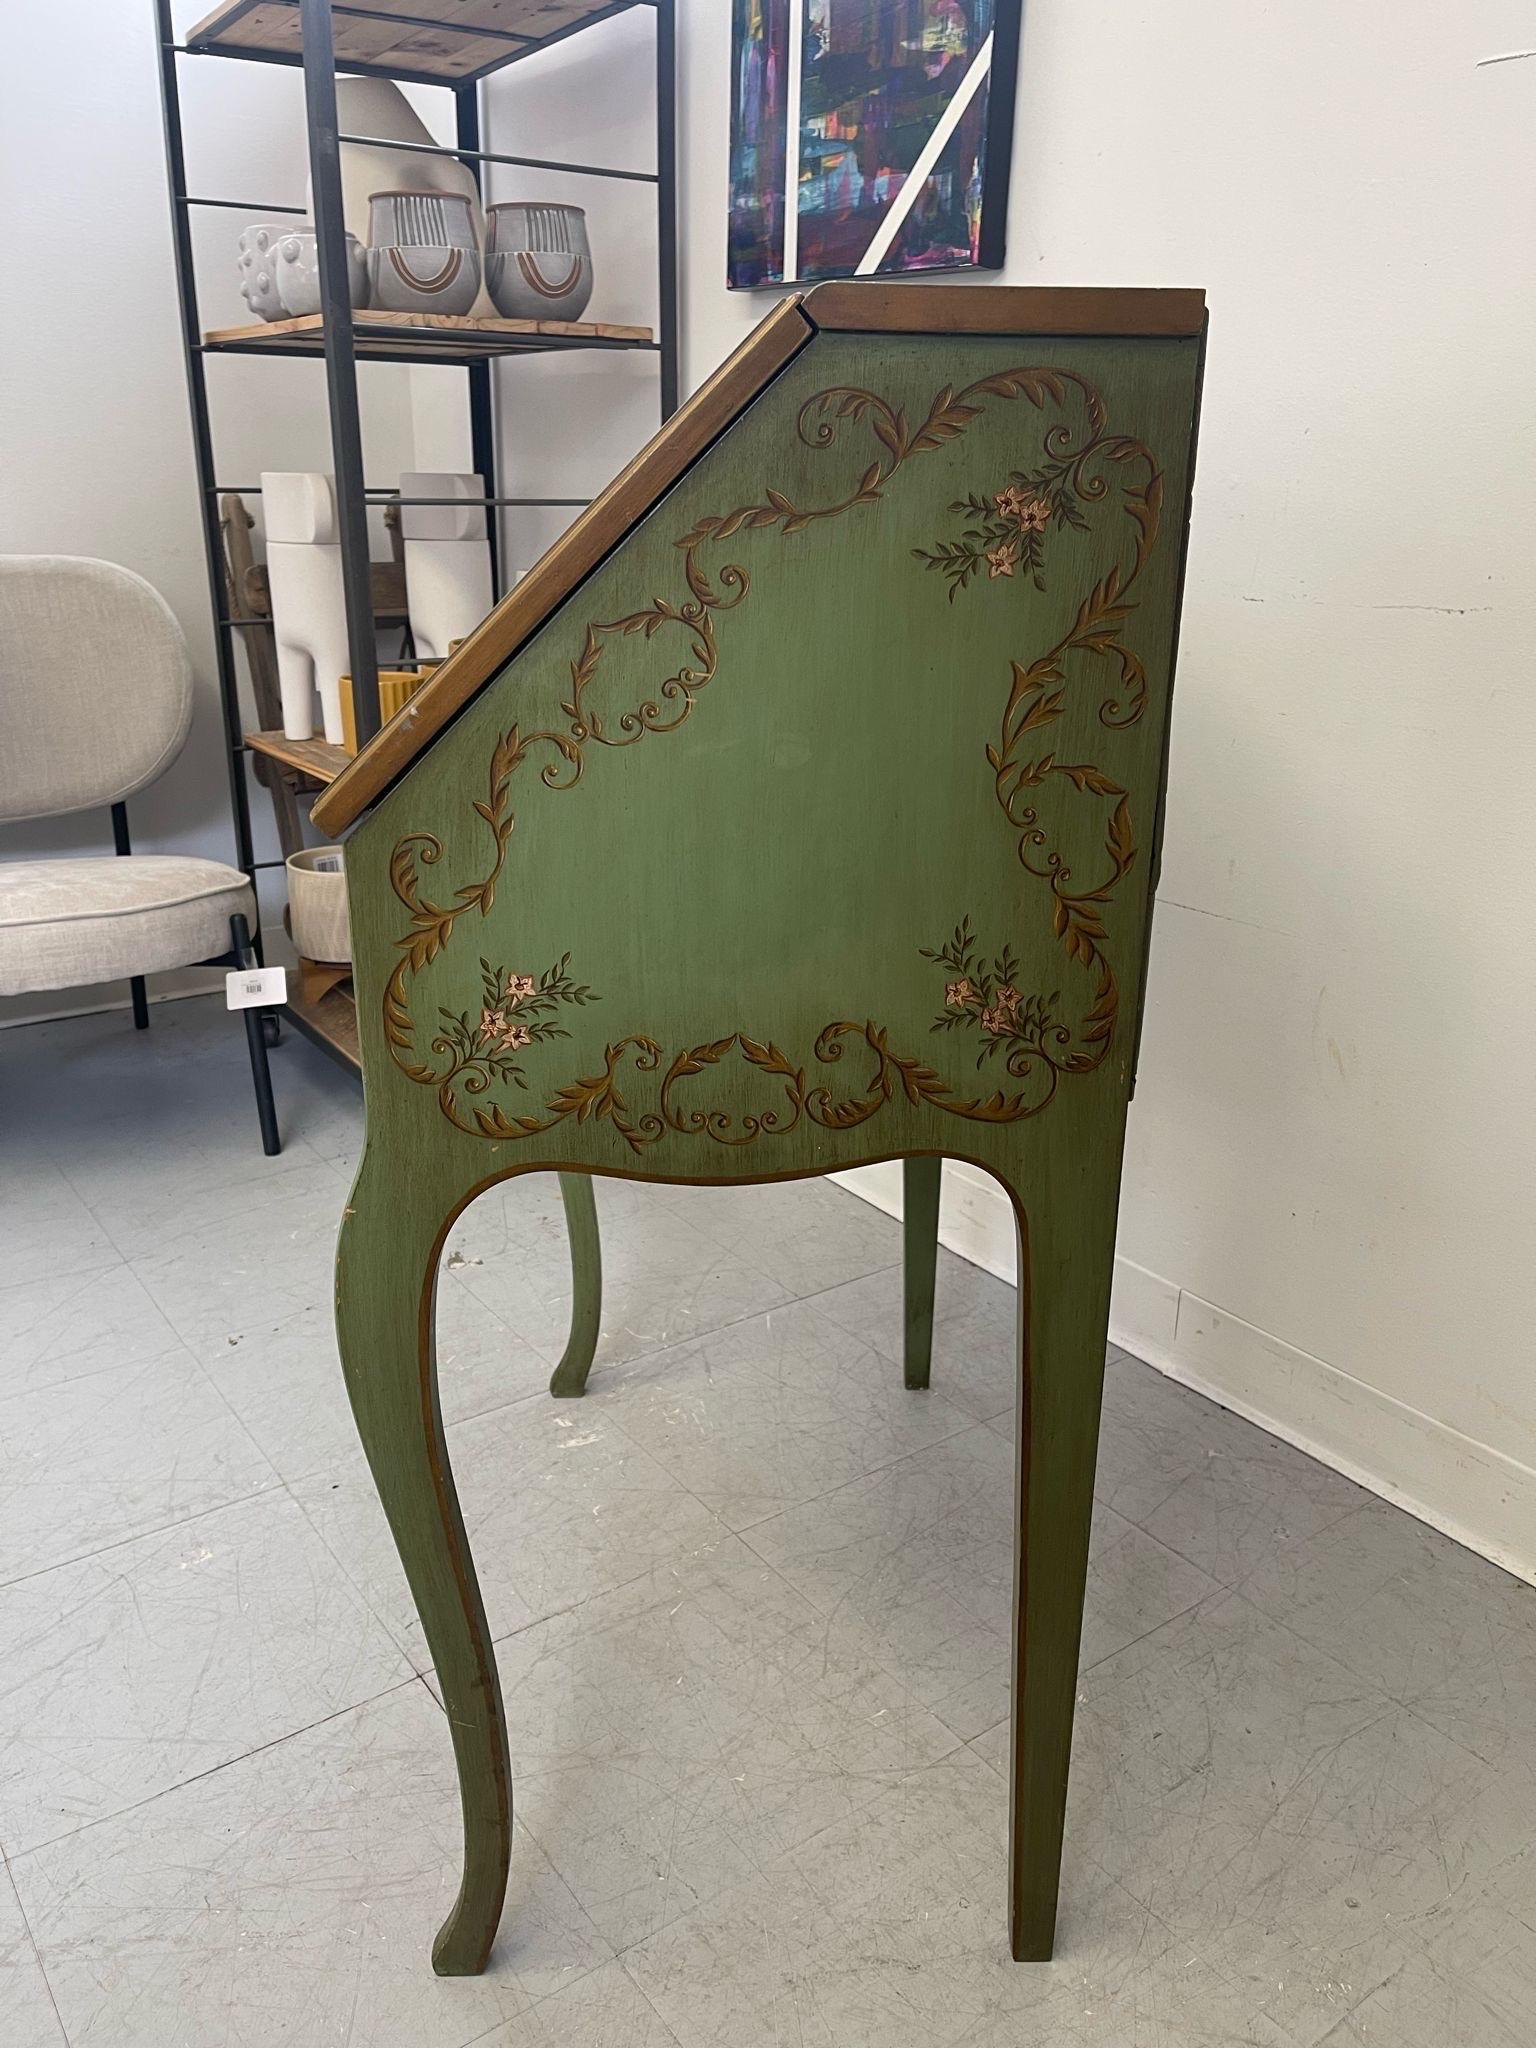 Late 20th Century Vintage French Regency Style Bureau Desk With HandPainted Floral Motif and chair For Sale